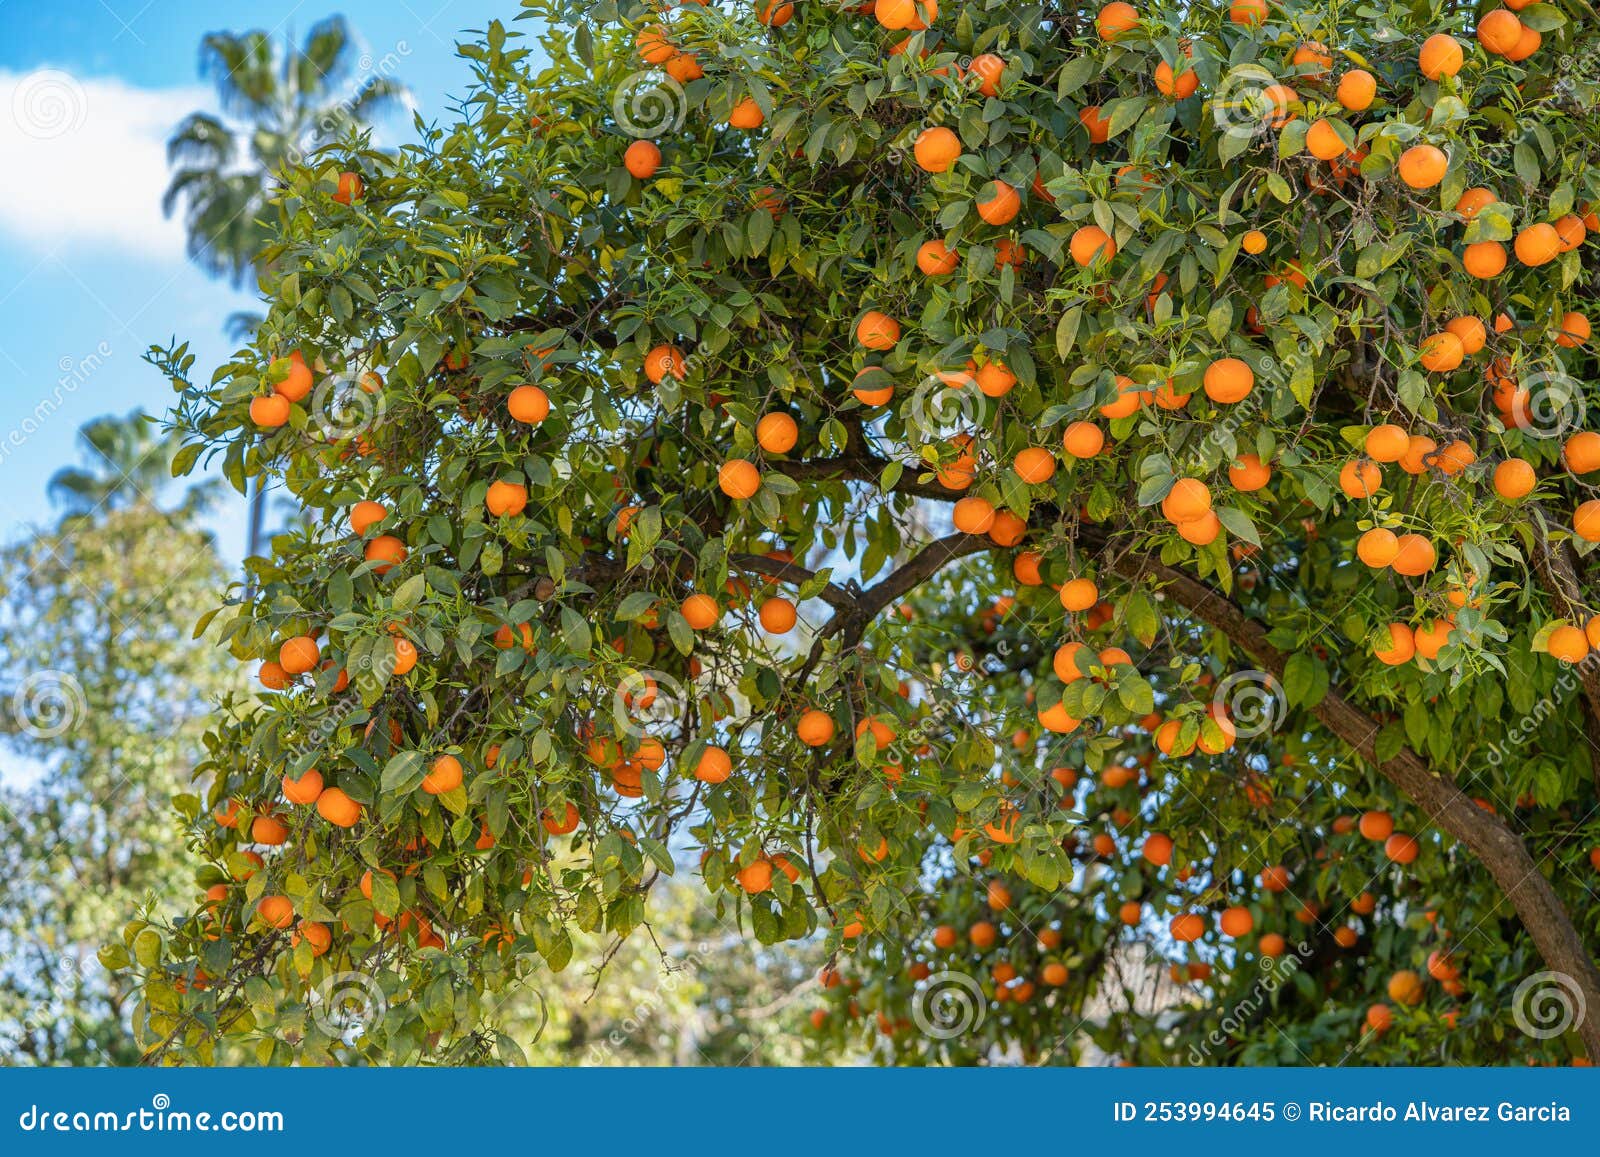 orange trees in the maria luisa park in the city of seville, in spain.